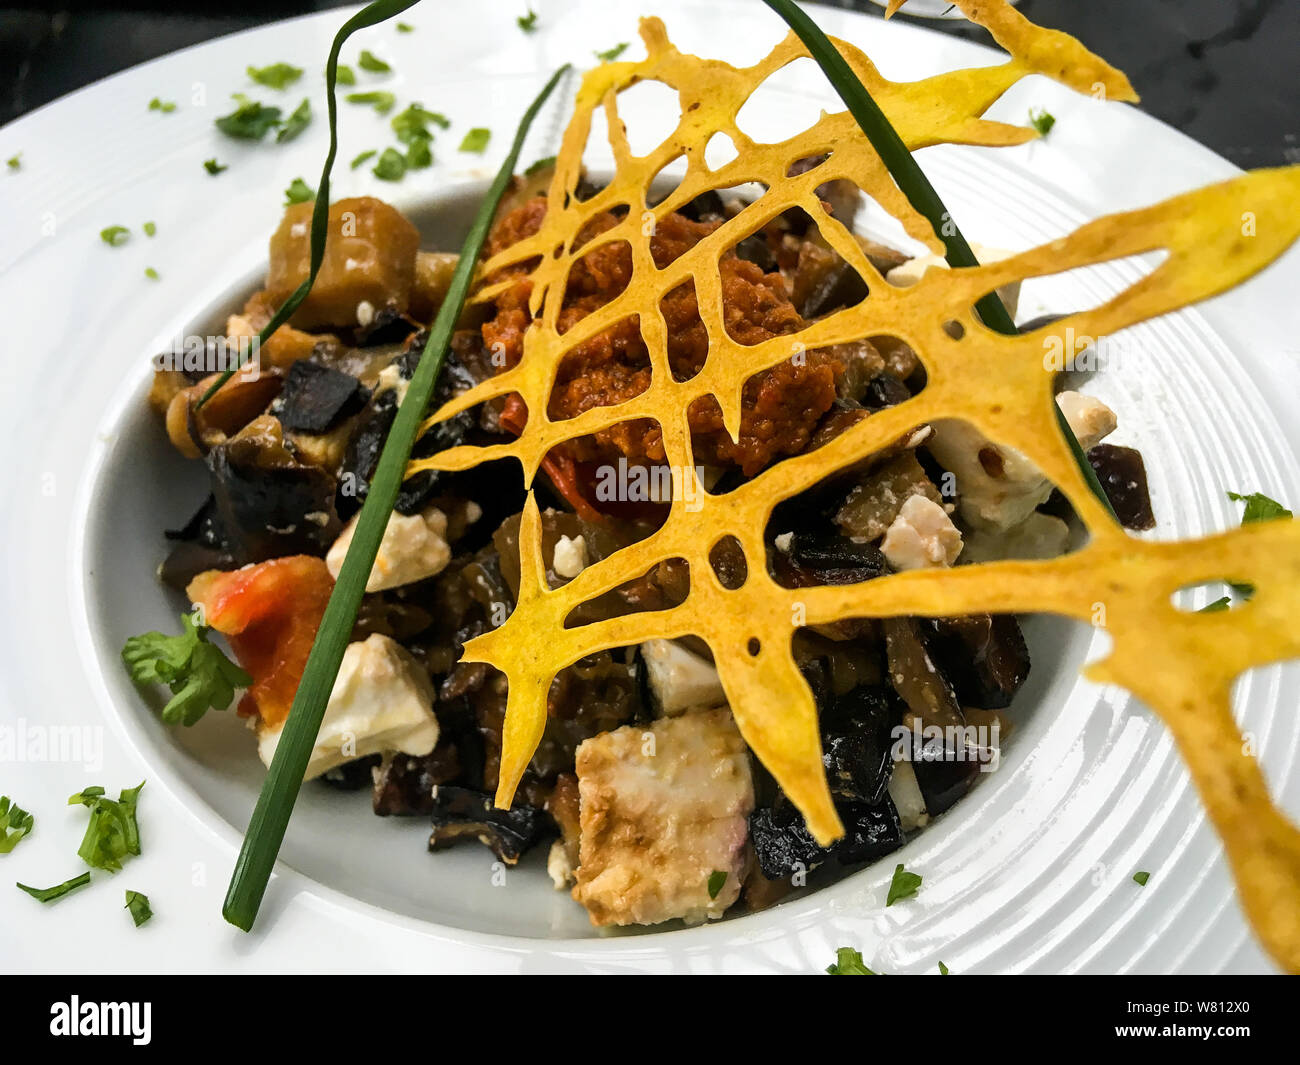 Vegetarian dish putted on a table, Alès, Gard, France Stock Photo